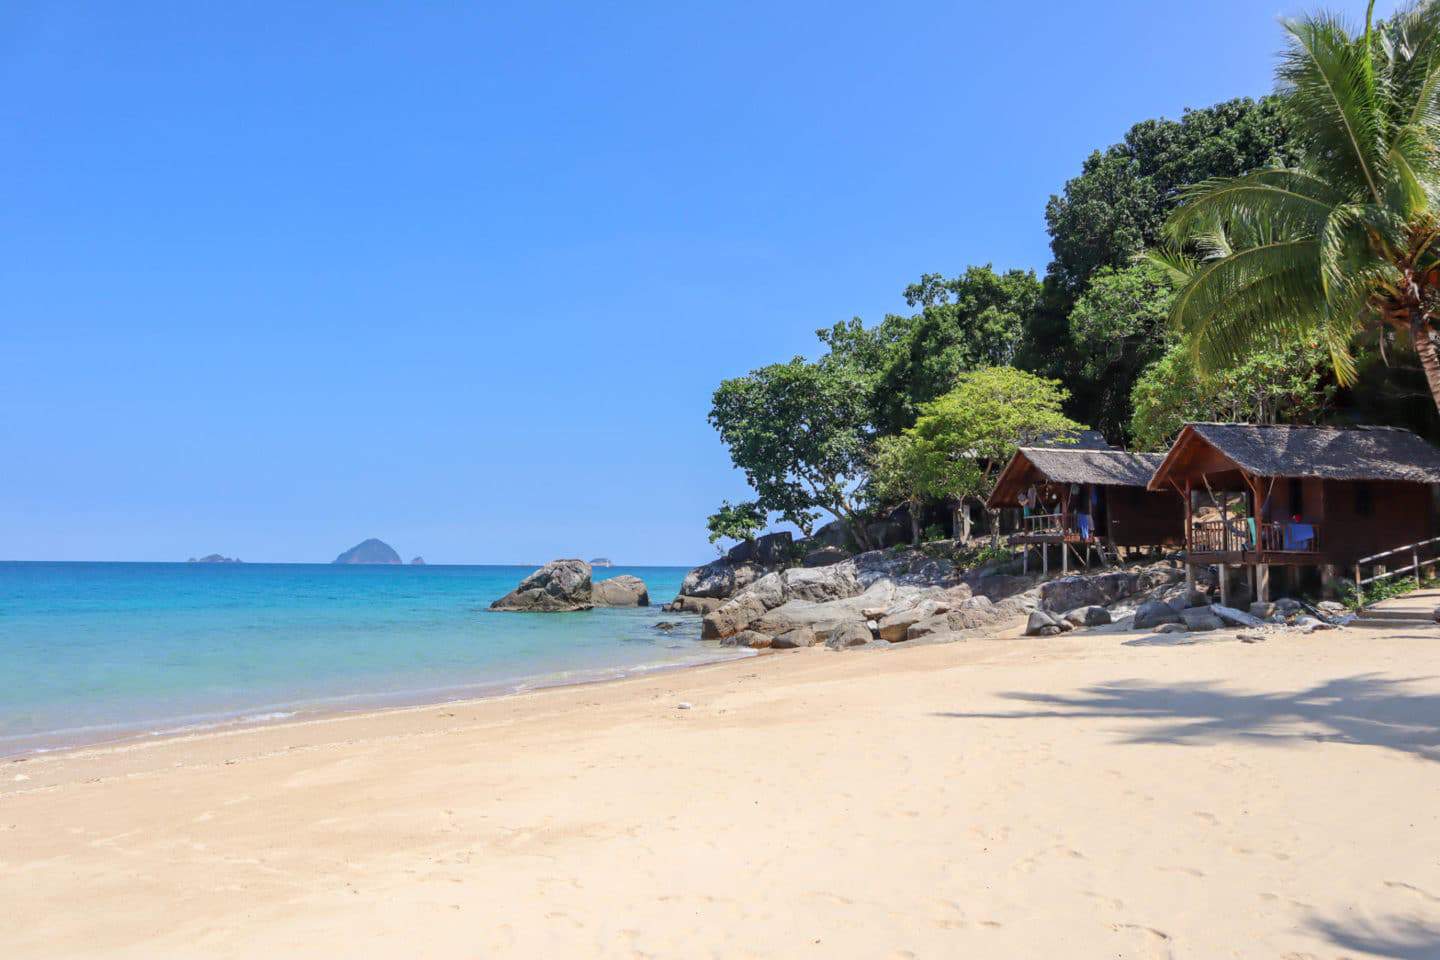 Perhentian Islands Accommodation, best accommodation on perhentian islands Mira Beach Bunaglows